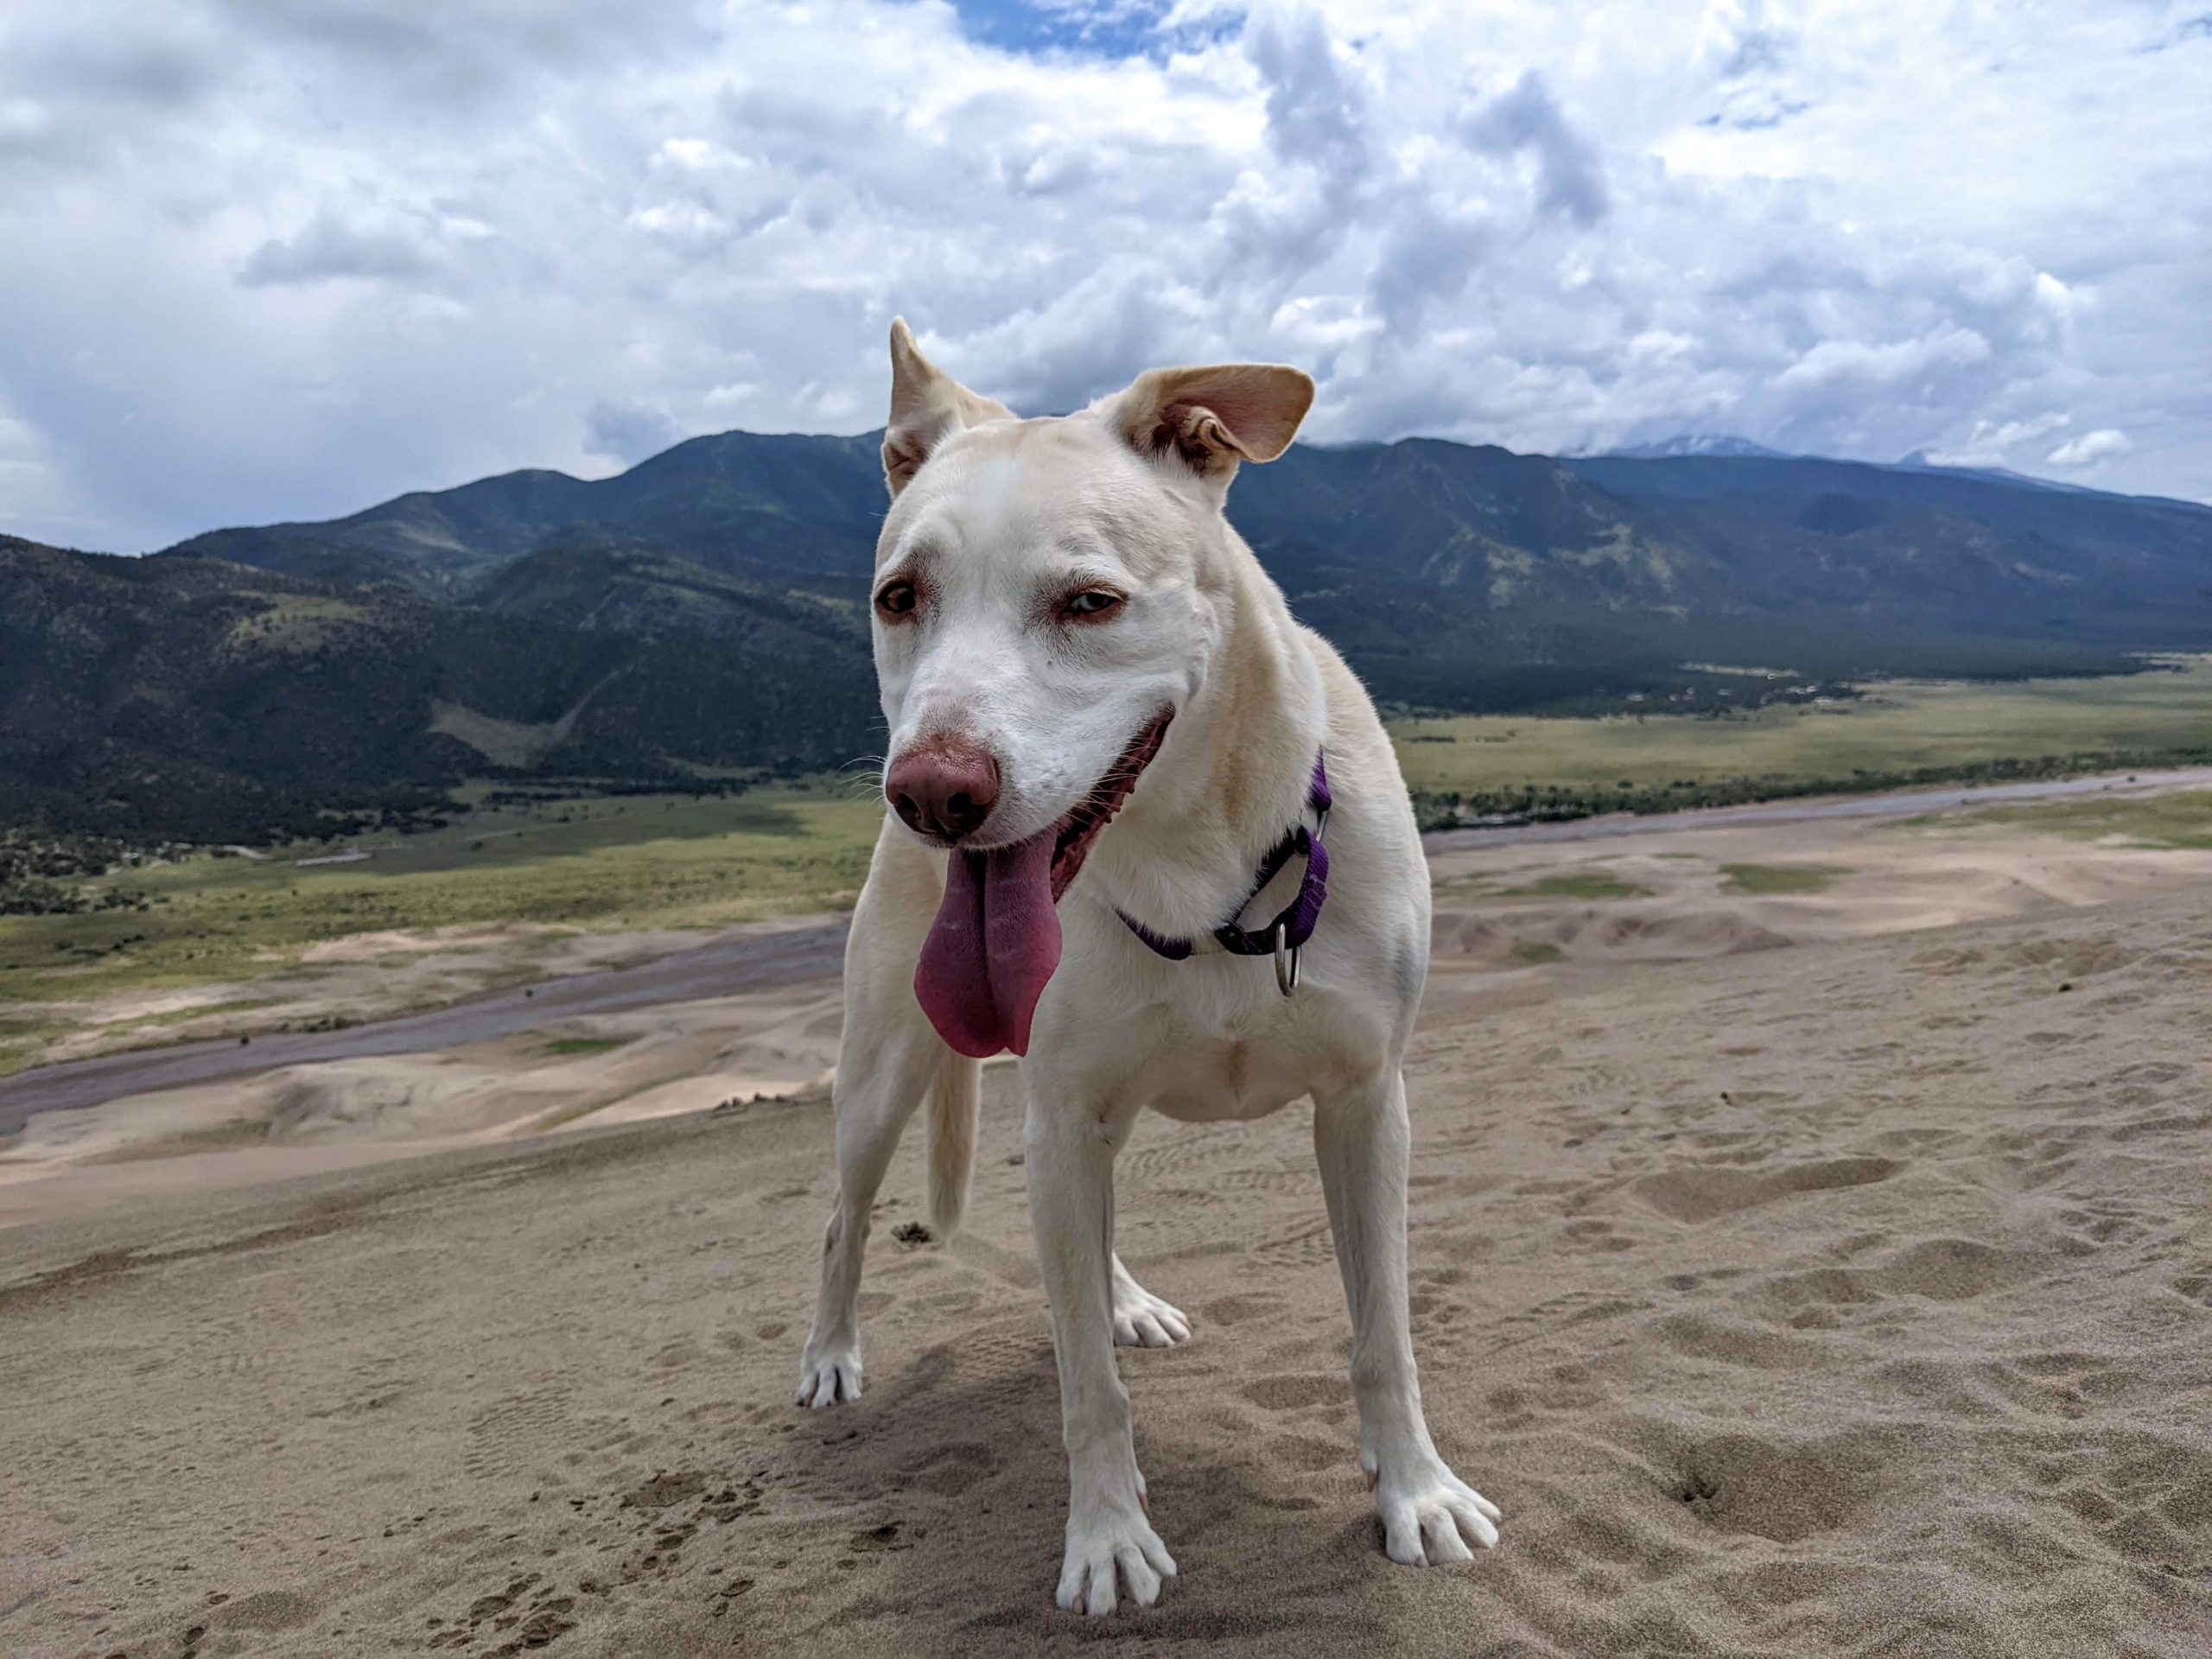 Trip Report: 2022-07 Great Sand Dunes National Park and Preserve, CO